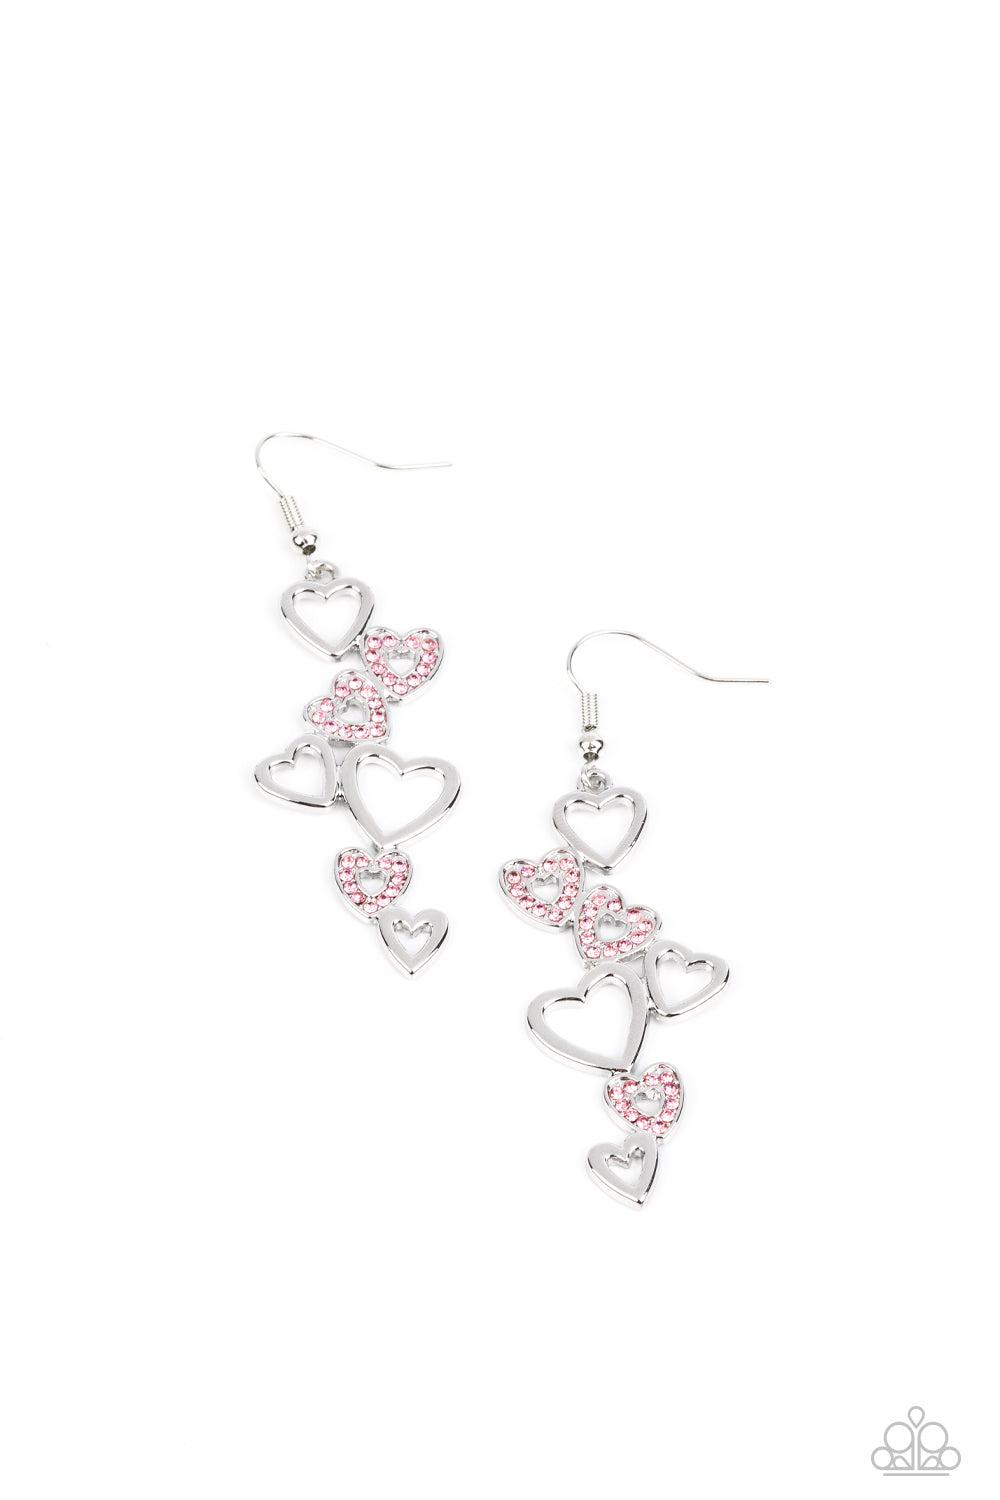 Sweetheart Serenade Pink Heart Earrings - Paparazzi Accessories- lightbox - CarasShop.com - $5 Jewelry by Cara Jewels